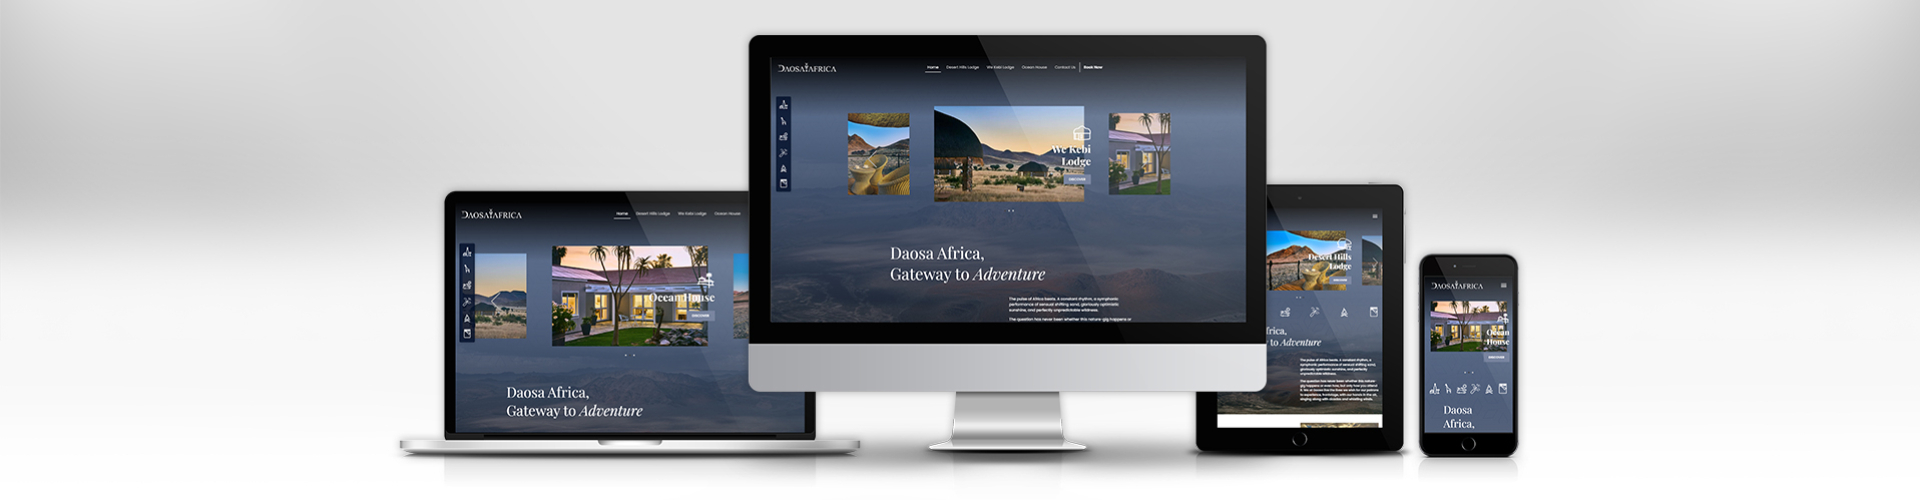 Daosa Africa Lodges